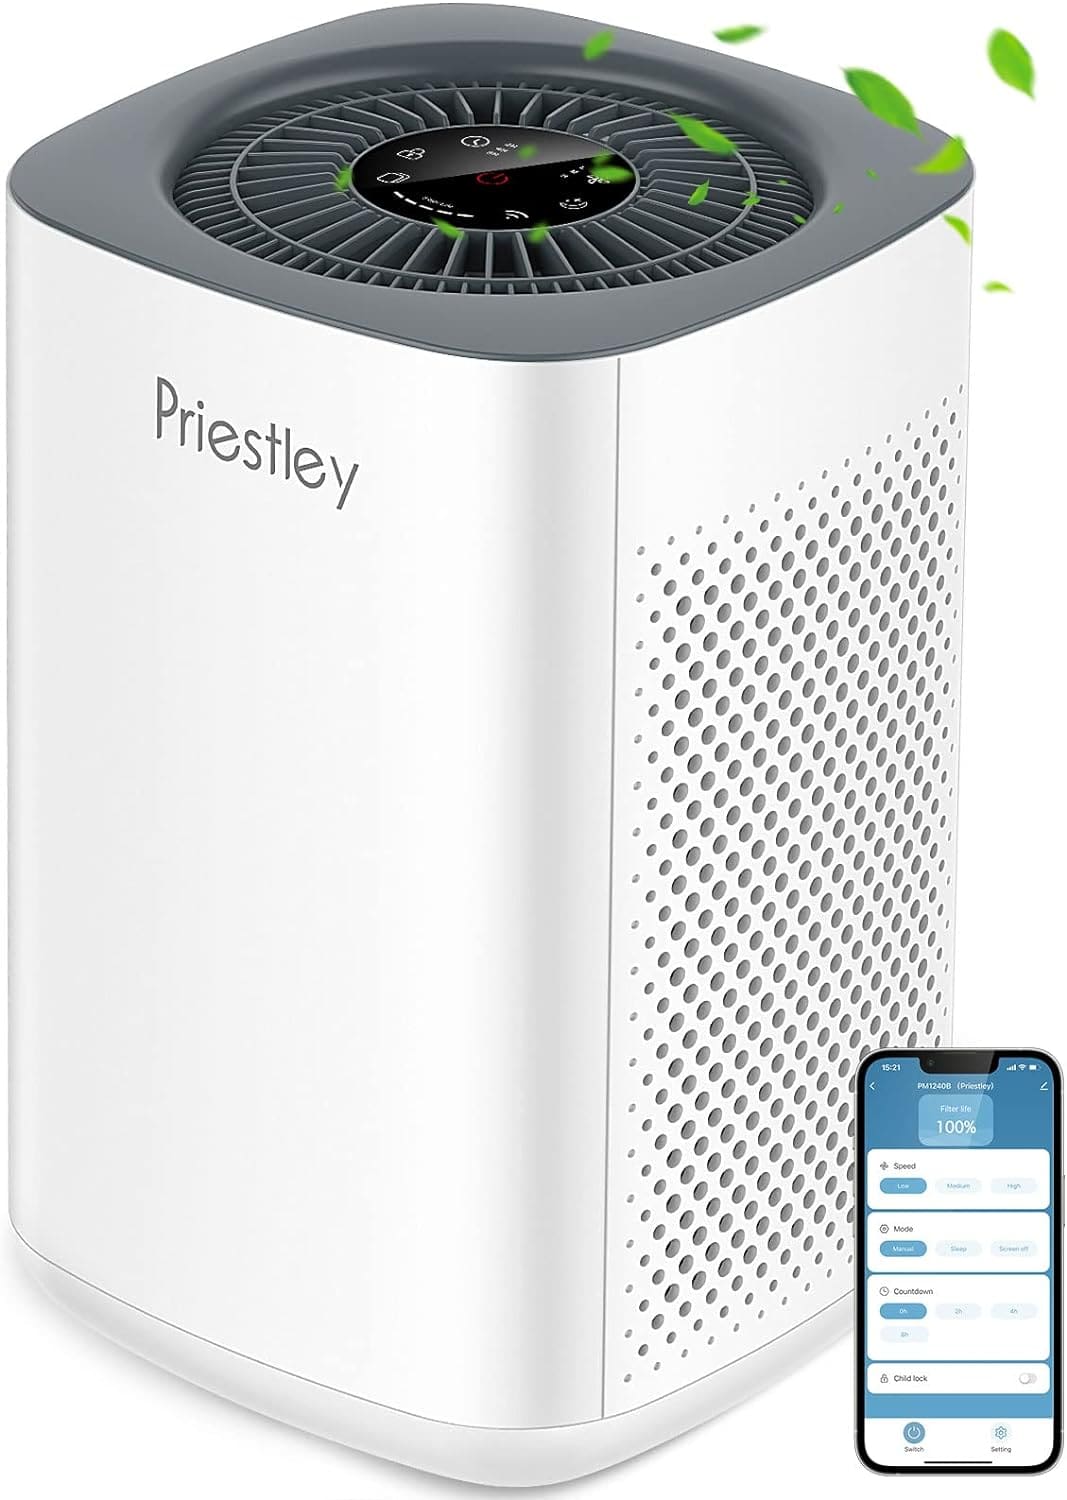 Priestley Air Purifier Review